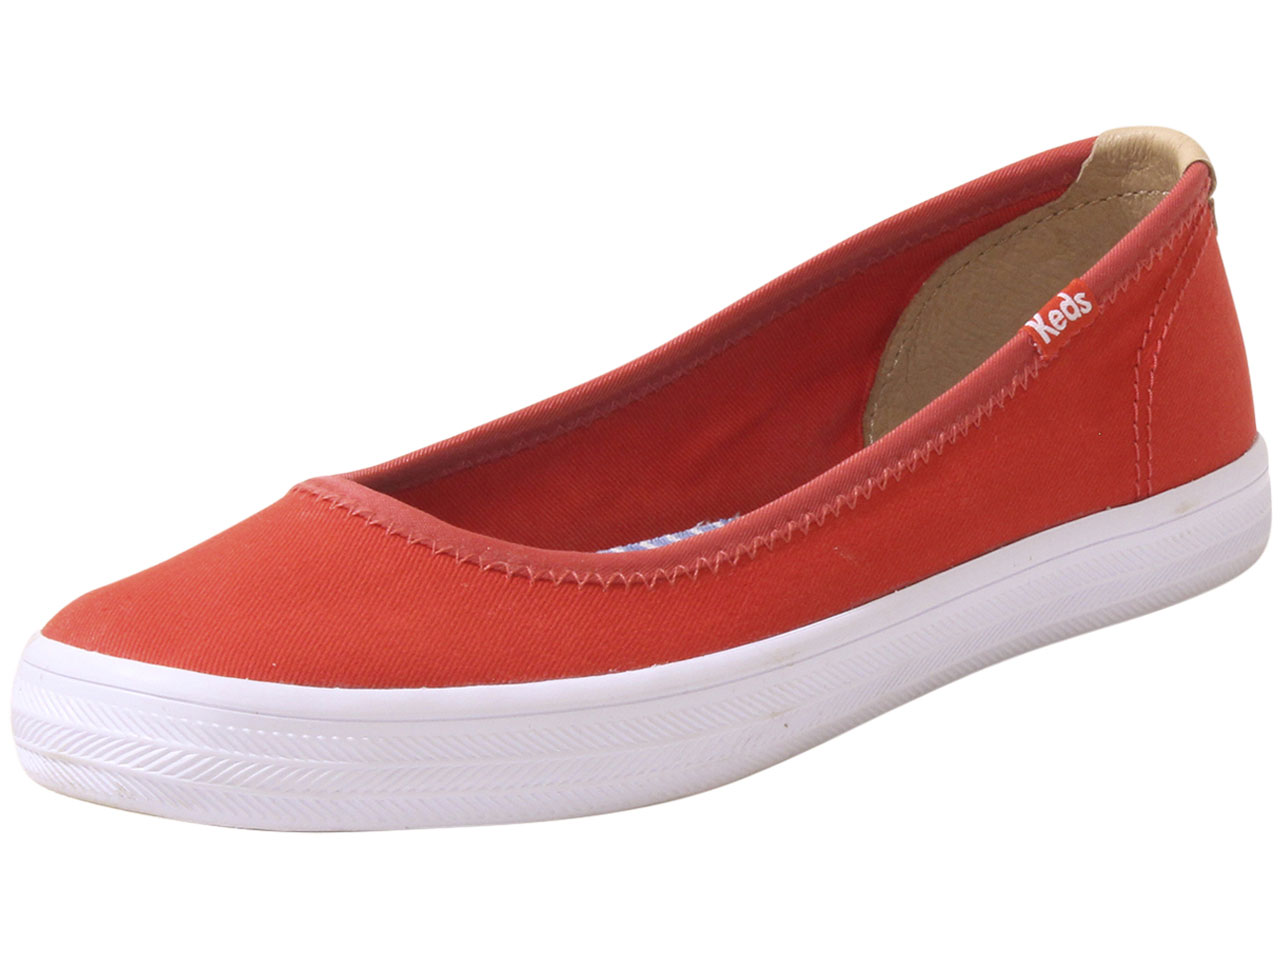 UPC 044212124727 product image for Keds Women's Bryn Ballet Flats Shoes Red Sz: 7.5 WF61839 - 7.5 B(M) US | upcitemdb.com